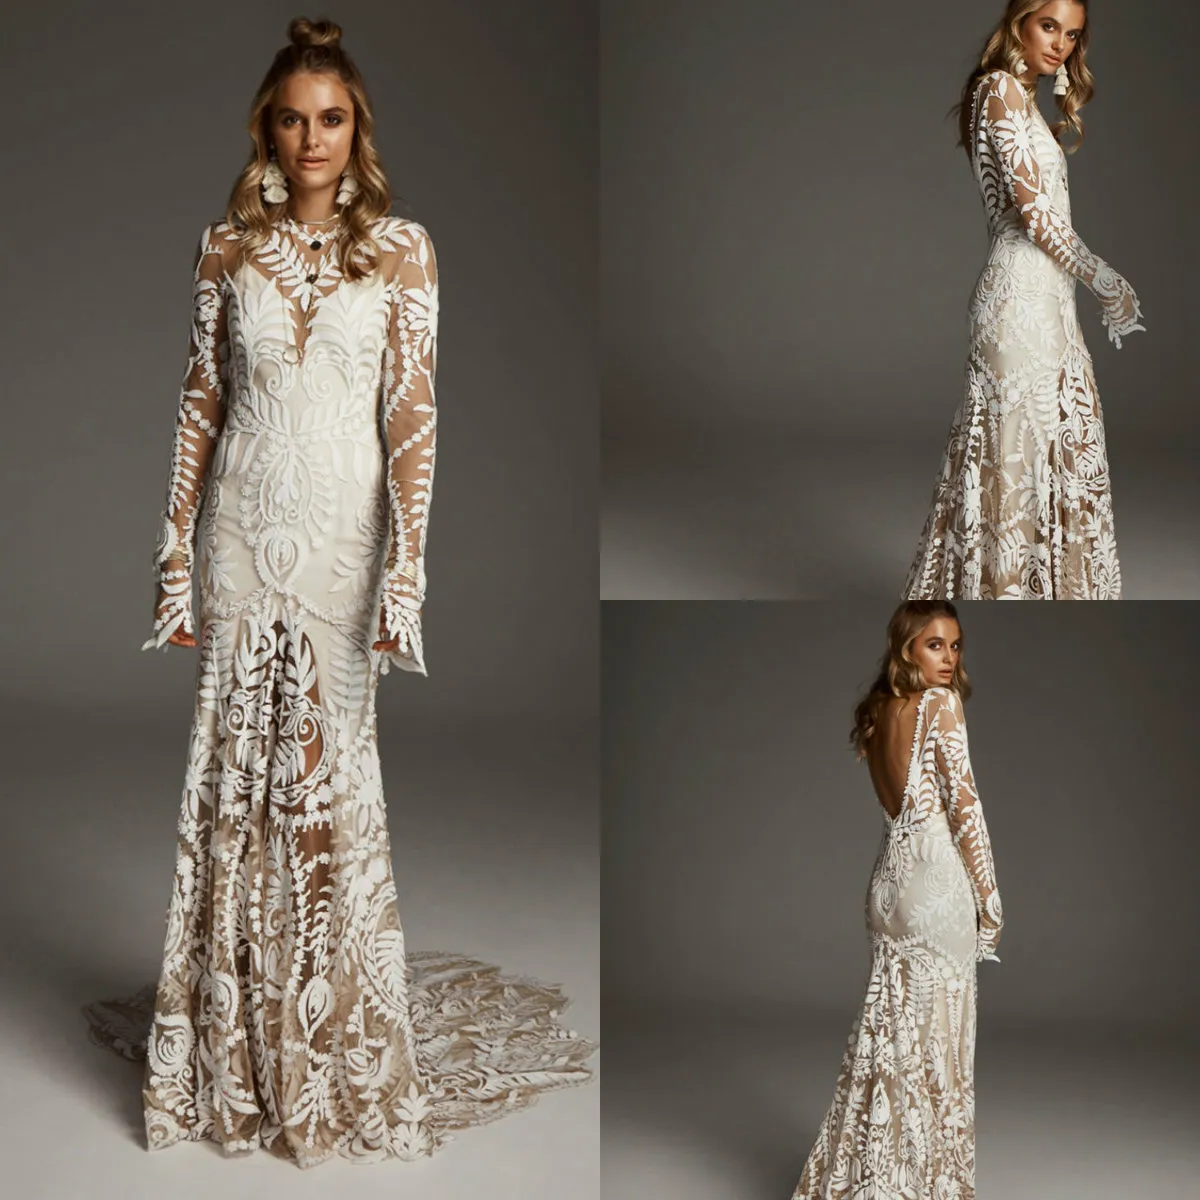 2020 Lace Mermaid Wedding Dresses Bridal Gowns Jewel Neck Appliqued Long Sleeves Backless Country Wedding Dress Sweep Train robes de mariée